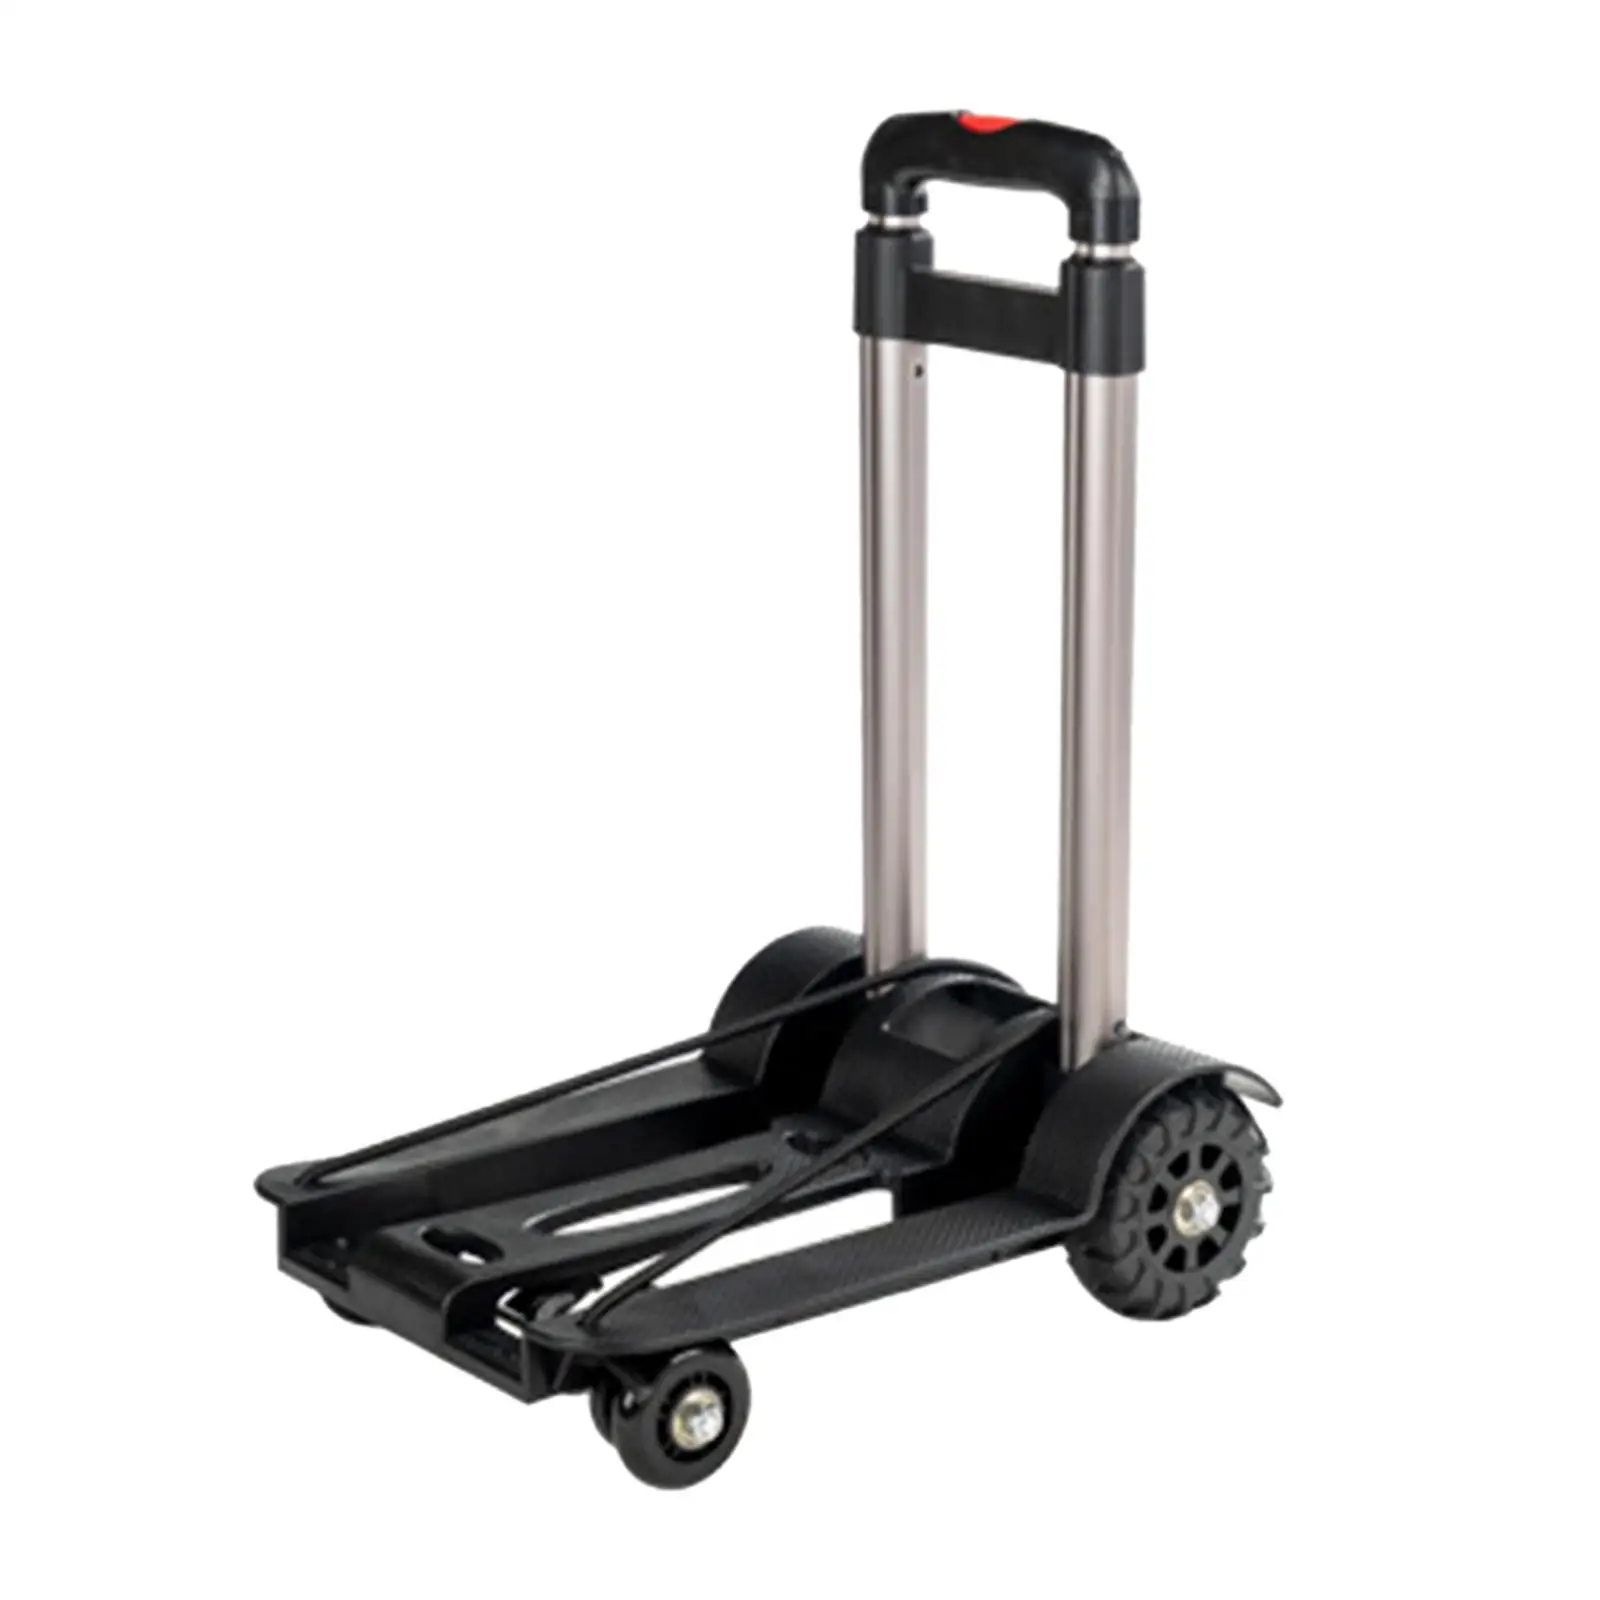 Folding Hand Truck Folding Hand Cart 40kg Load Capacity Furniture Wheel Trolley for Travel Shopping Moving